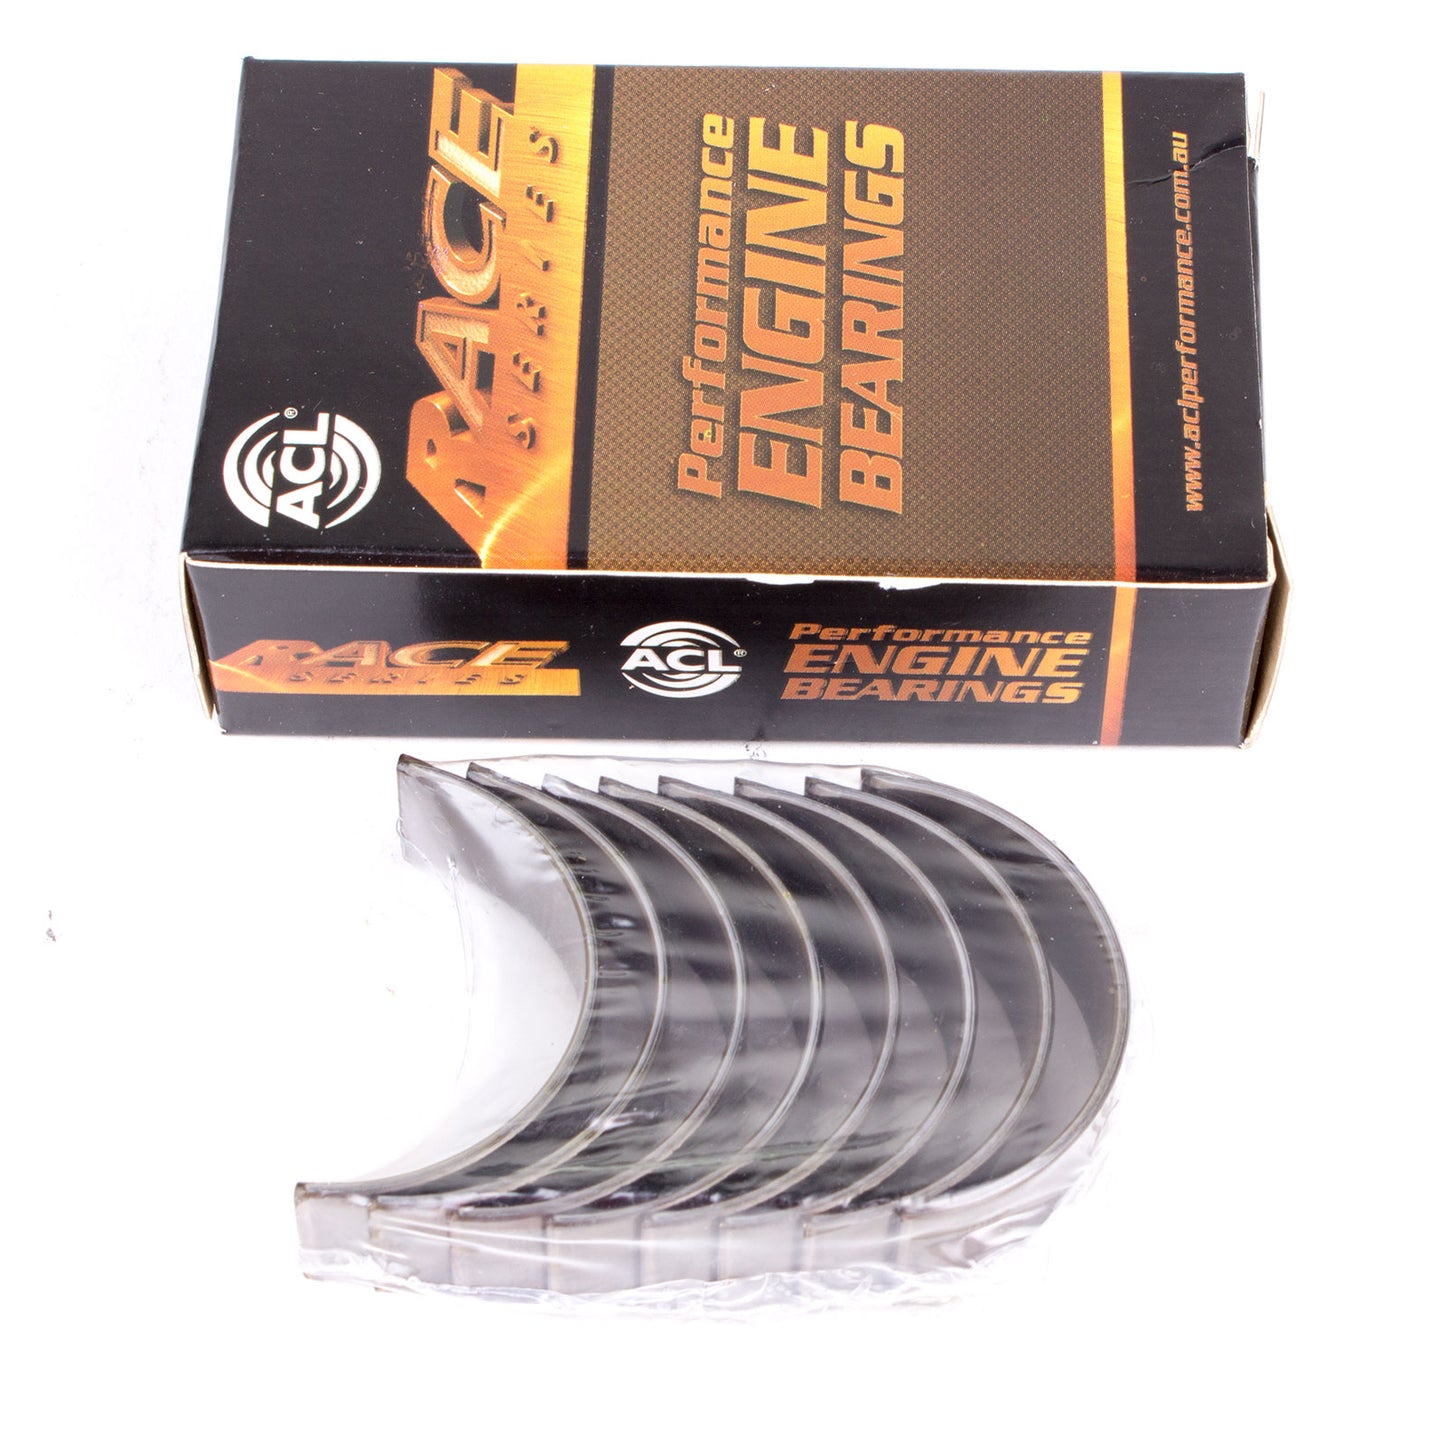 ACL race rod bearings for NA/NB